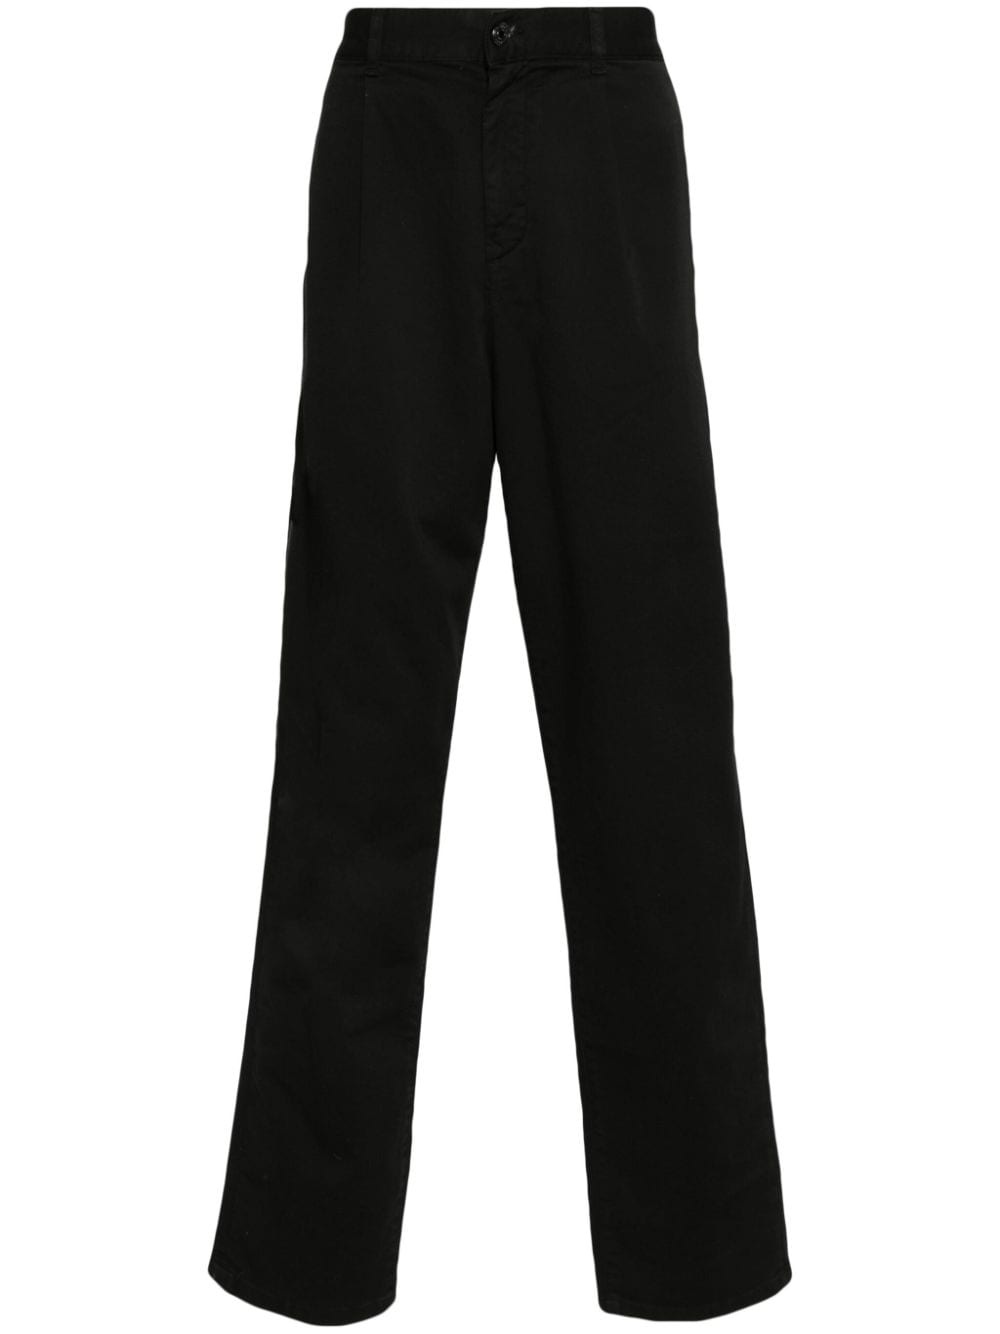 embroidered-motif chino trousers - 1